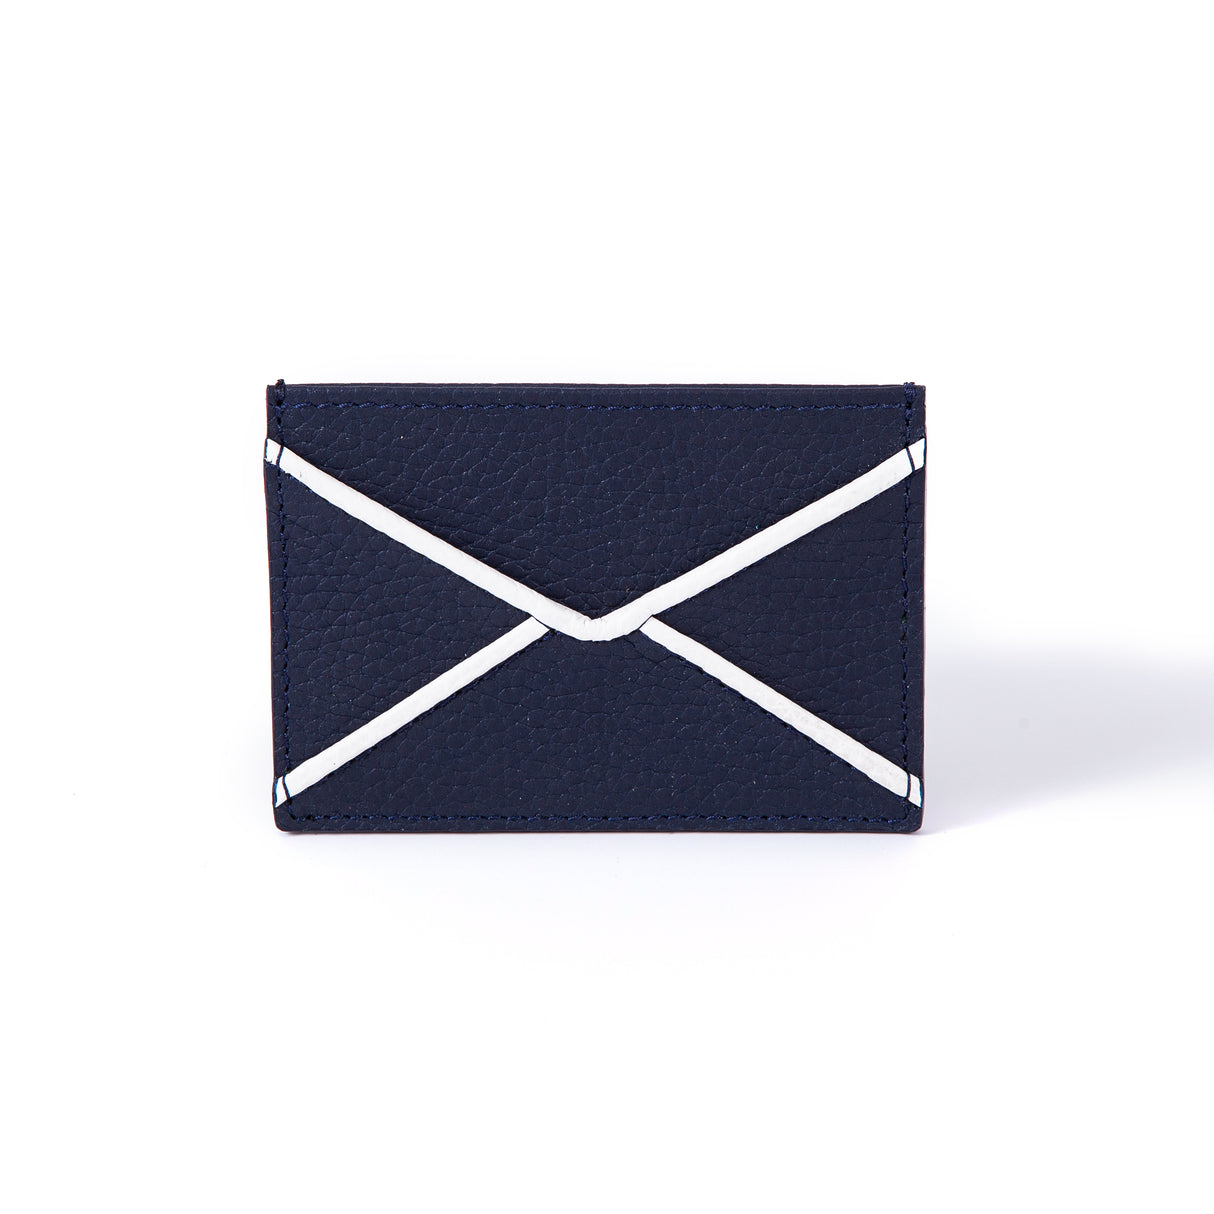 Madame Malachite  signature envelope credit card holders.   Pair it with our mini envelopes to use as a wallet.    Lined with our signature malachite fabric, these are the perfect way to add color to your life.  100% Leather  Handcrafted with love